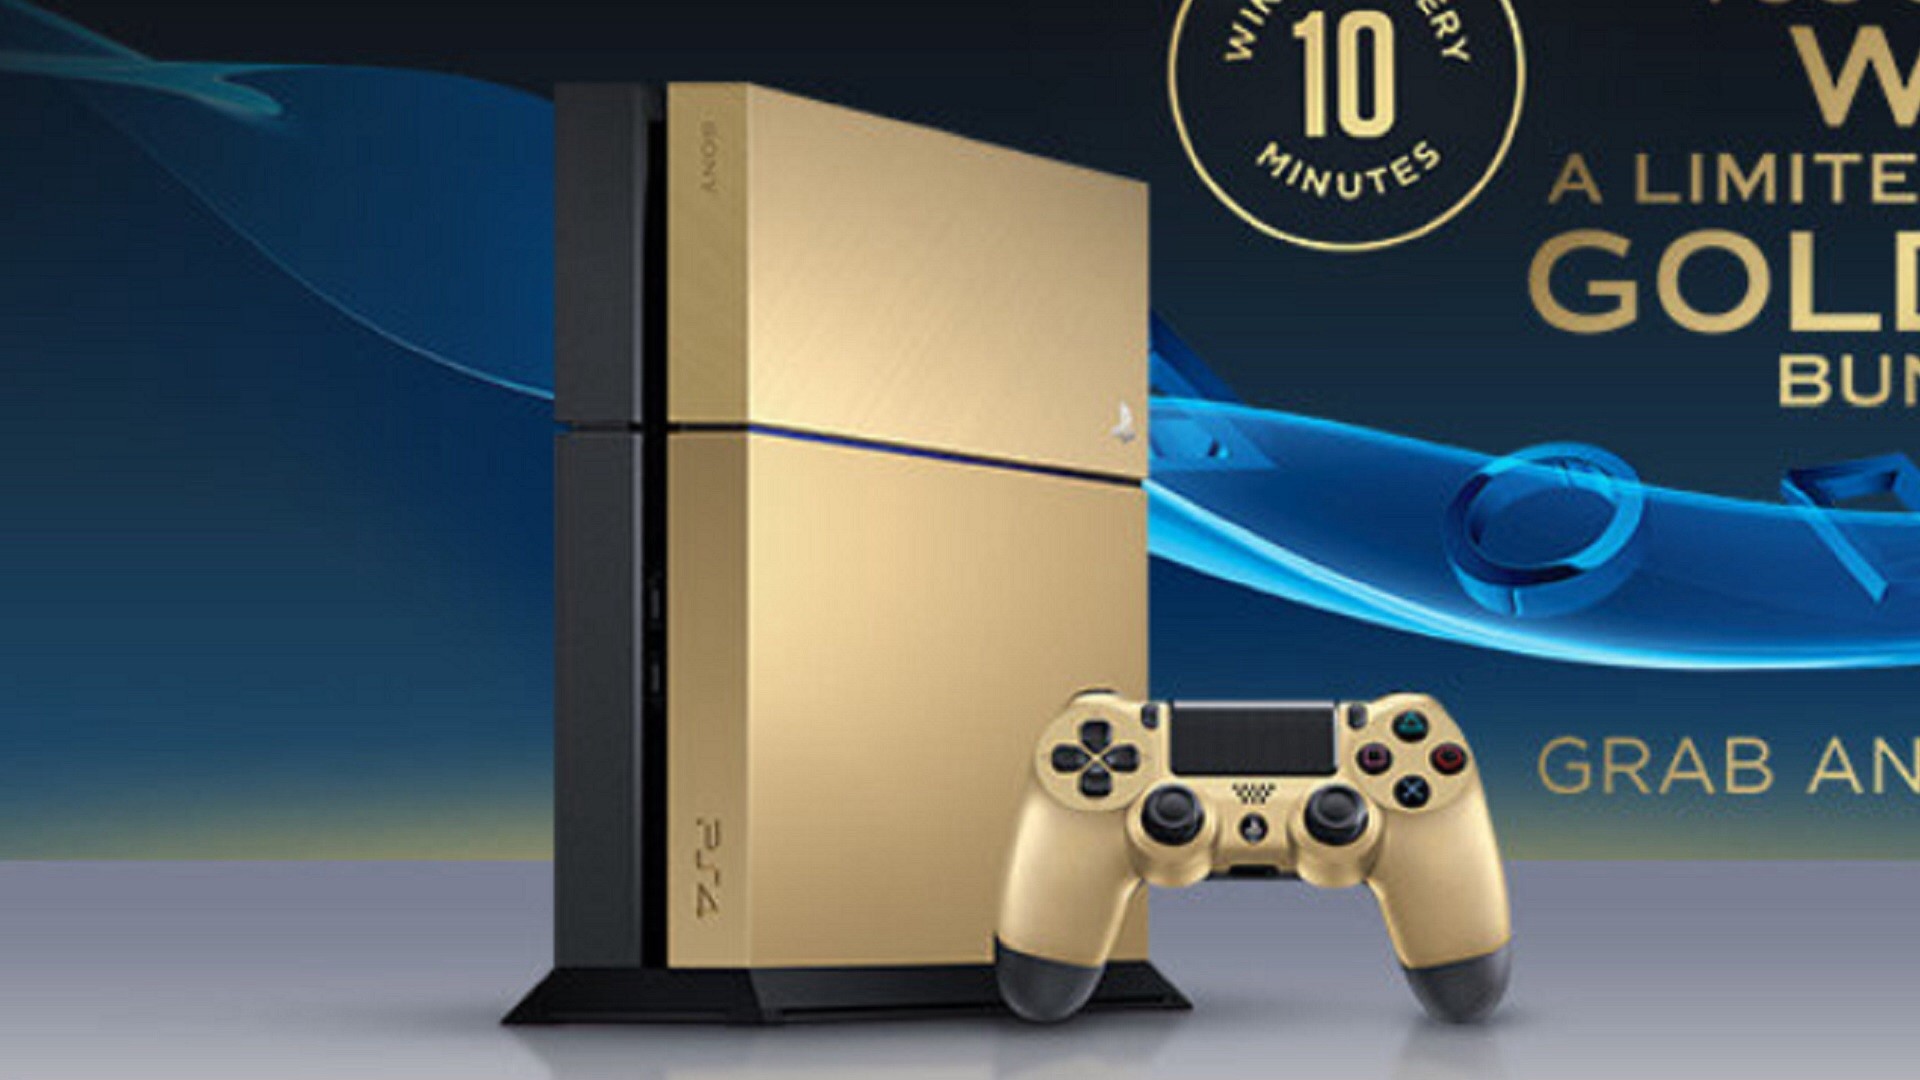 1920x1080 Limited Edition Gold PS4 Consoles to be Won From Taco Bell - AppleMagazine